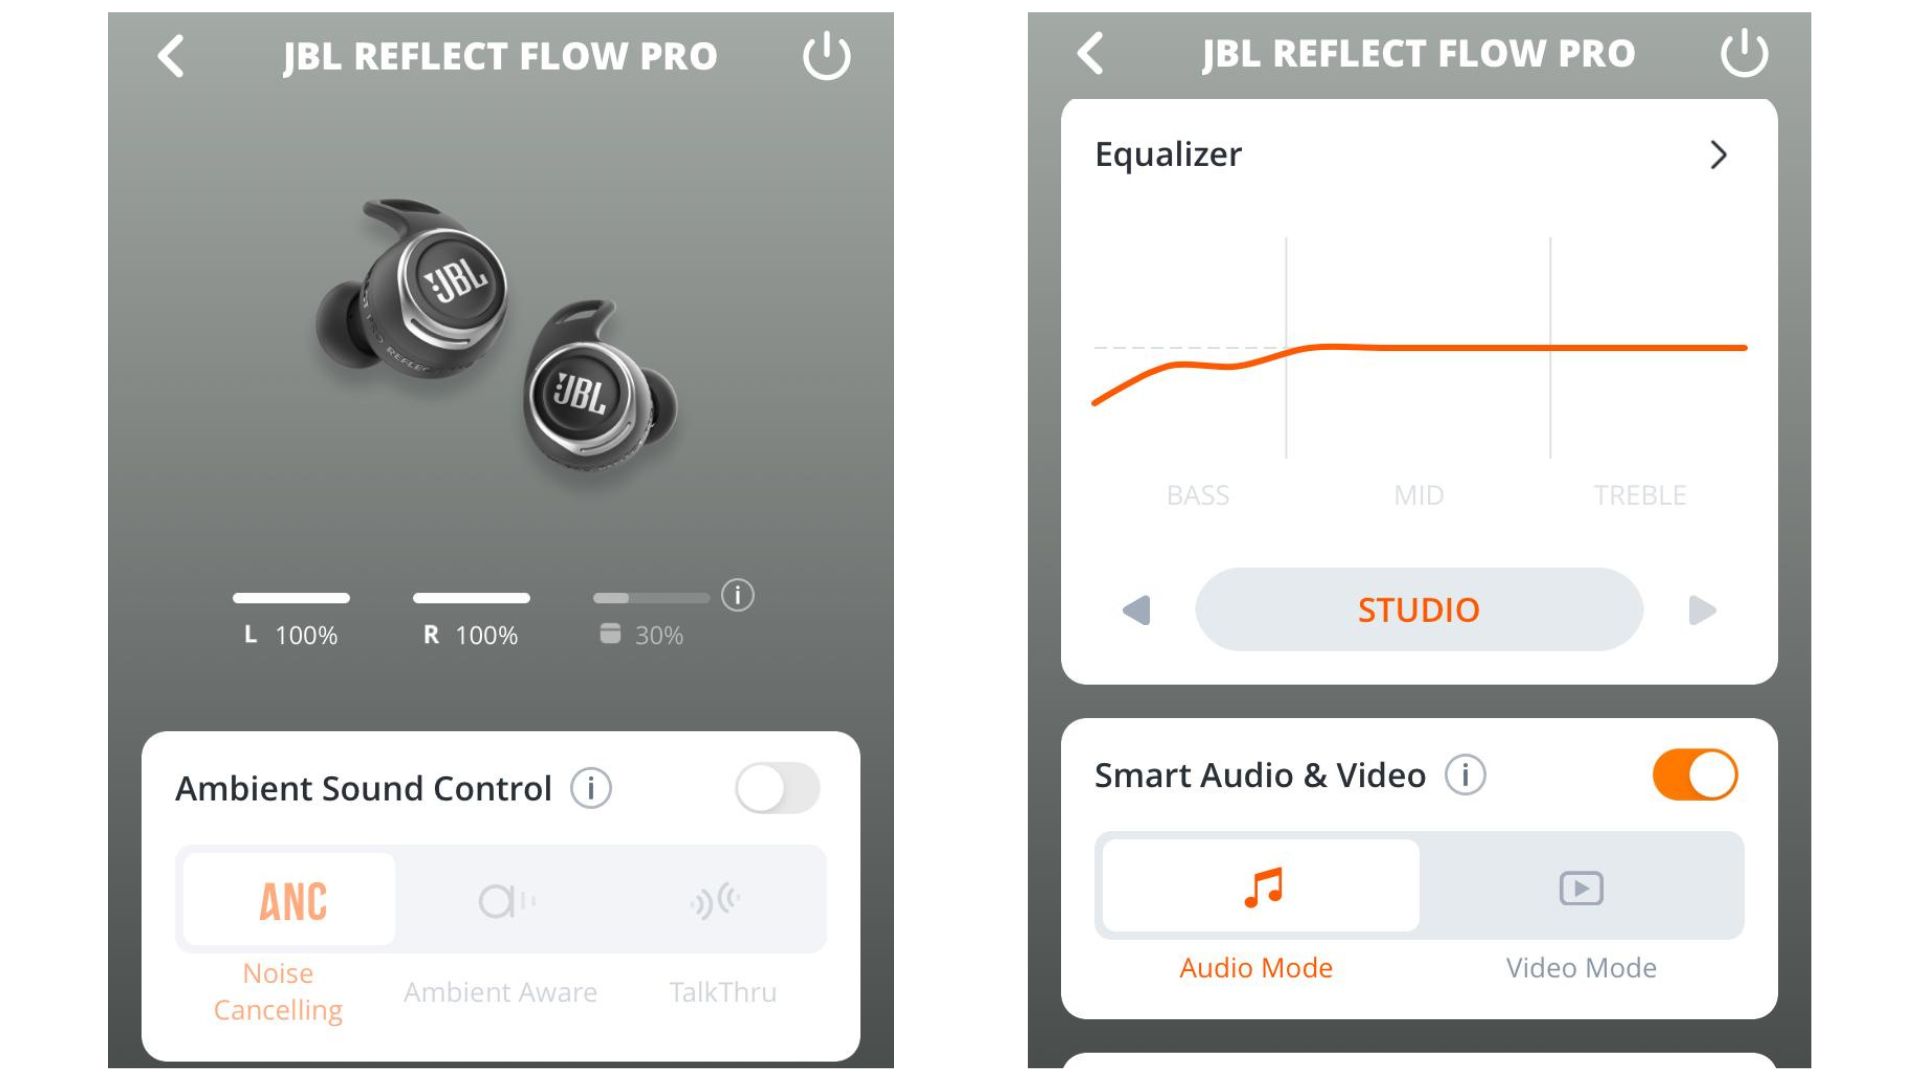 You can personalize the sound and touch control settings of your JBL Reflect Flow Pro headphones via the JBL Headphones app